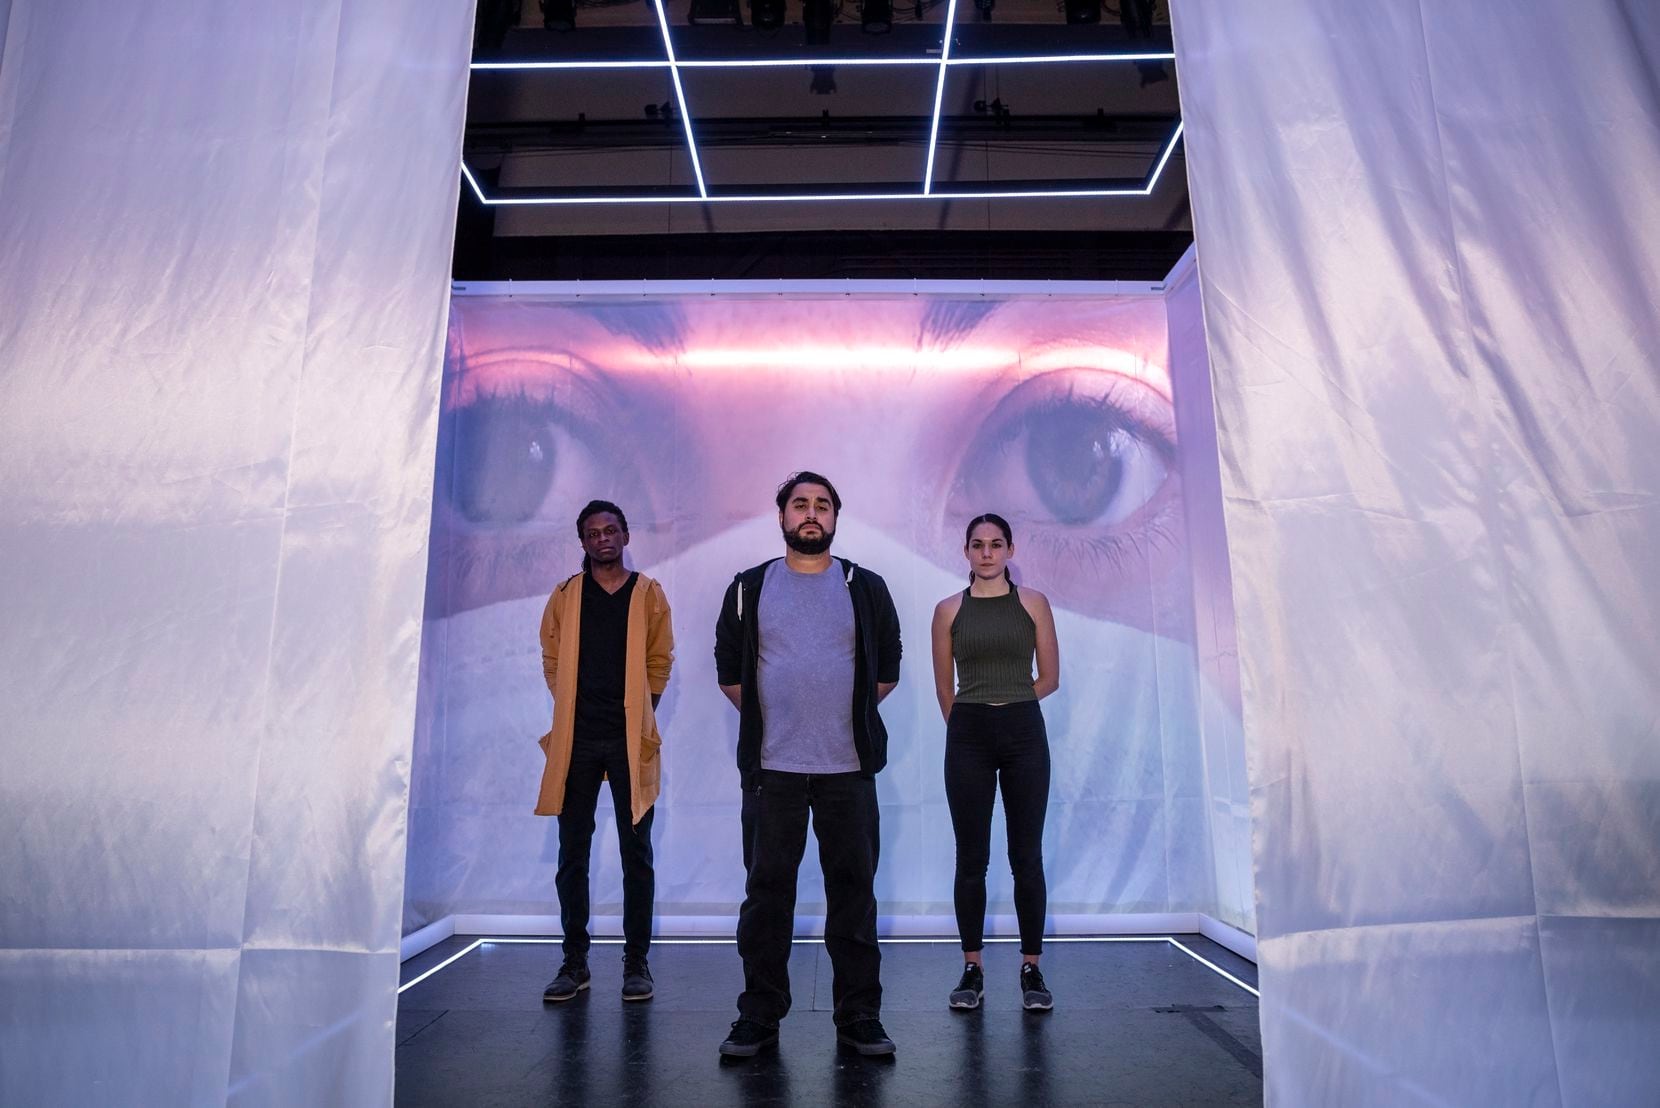 Writer-director Ruben Carrazana (center) composer-musician Nigel Newton (left) and choreographer-dancer Emily Bernet (right) pose for a portrait inside "The Cube" at the Latino Cultural Center. Conceived by Carrazana and set designer Jeffery Bryant Moffitt, the sold-out production is that rare beast amid the pandemic: live theater for an in-person audience.
